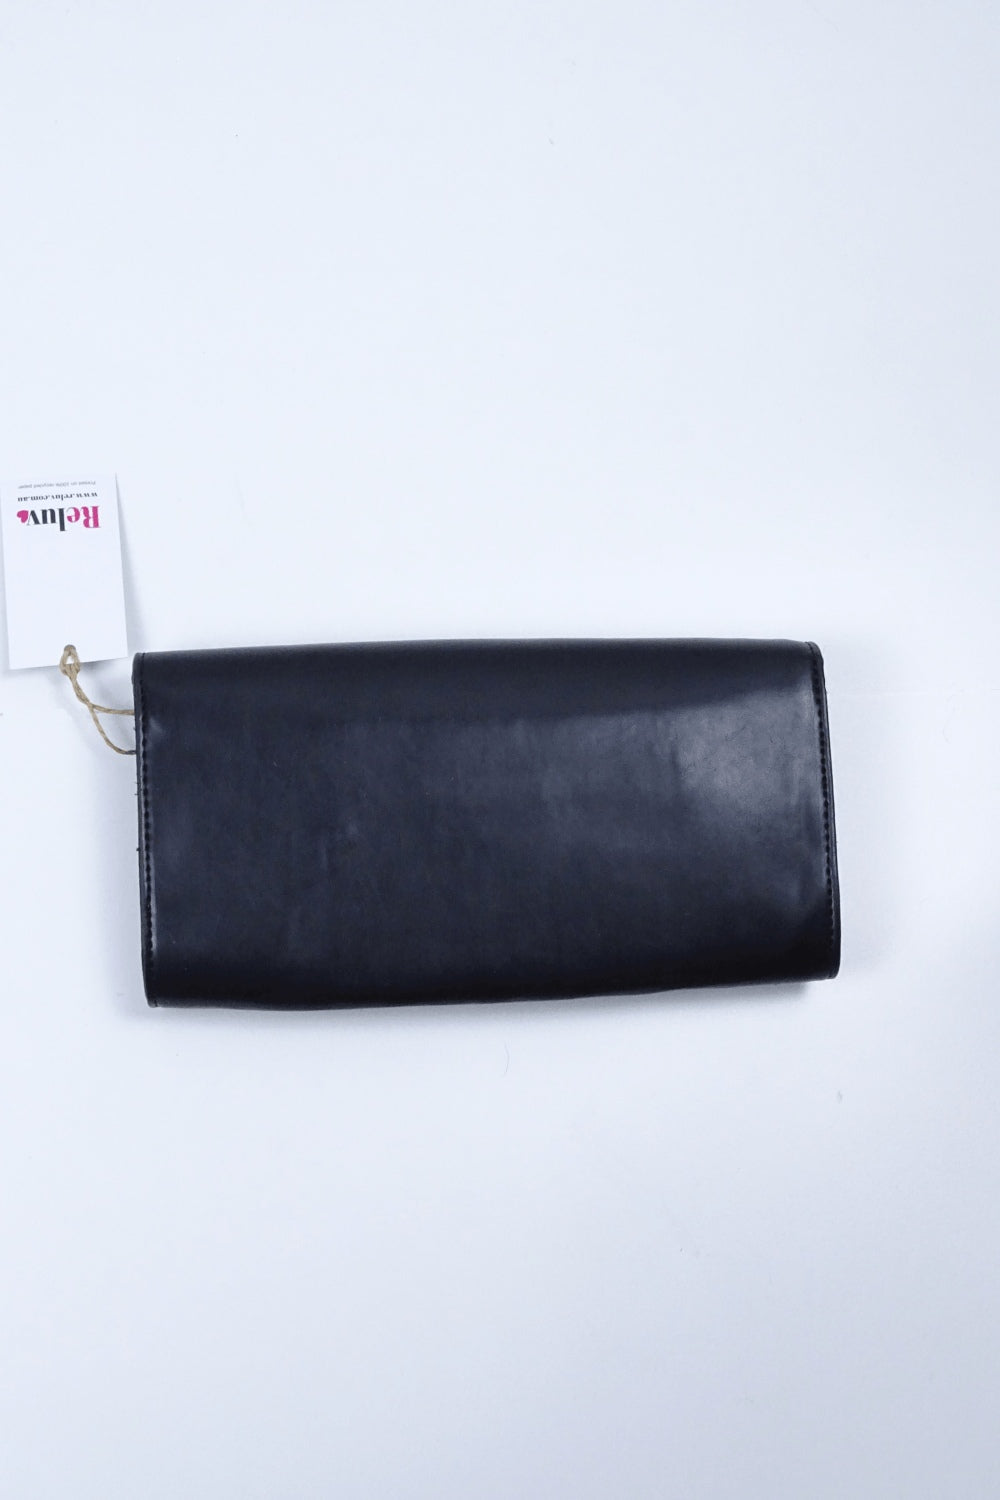 Black Faux Leather Clutch with Strap